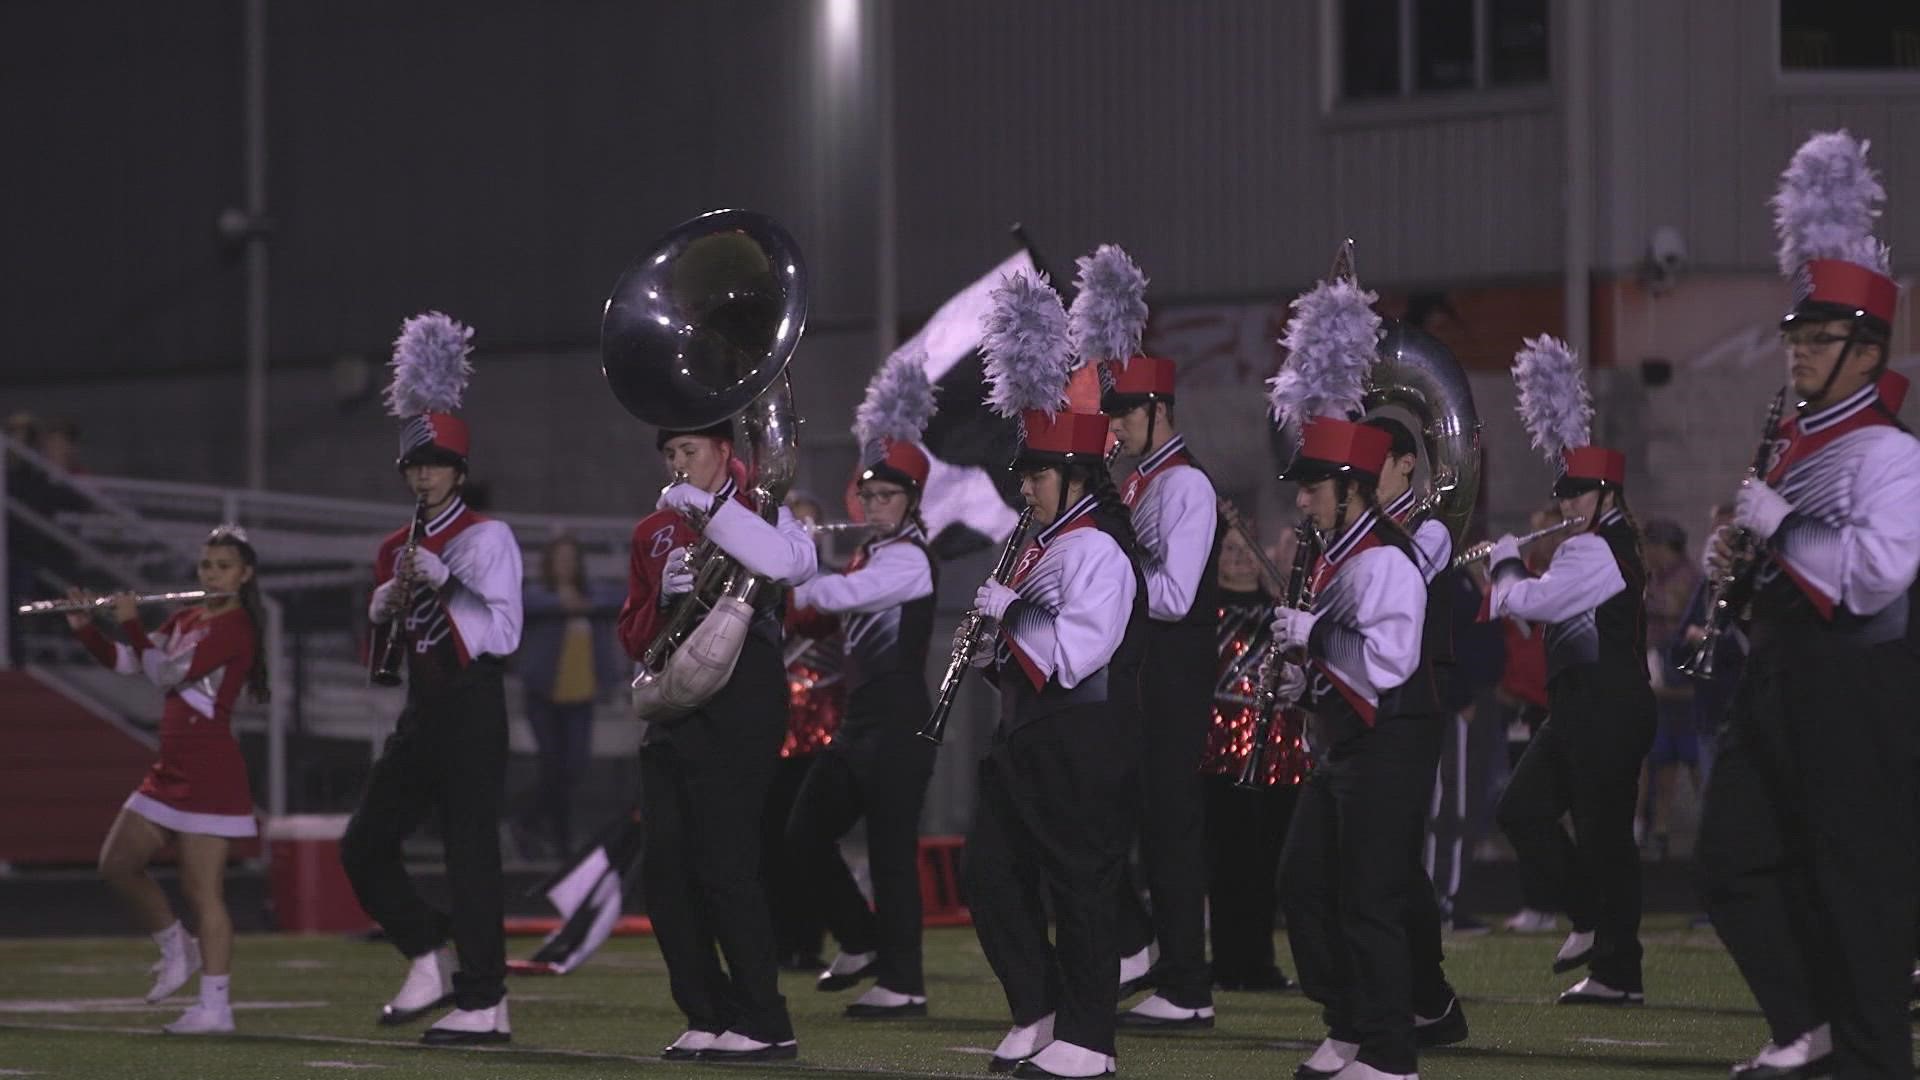 The Bellevue High School Marching Band has a long history of supporting the Redmen with over 40 events a year!